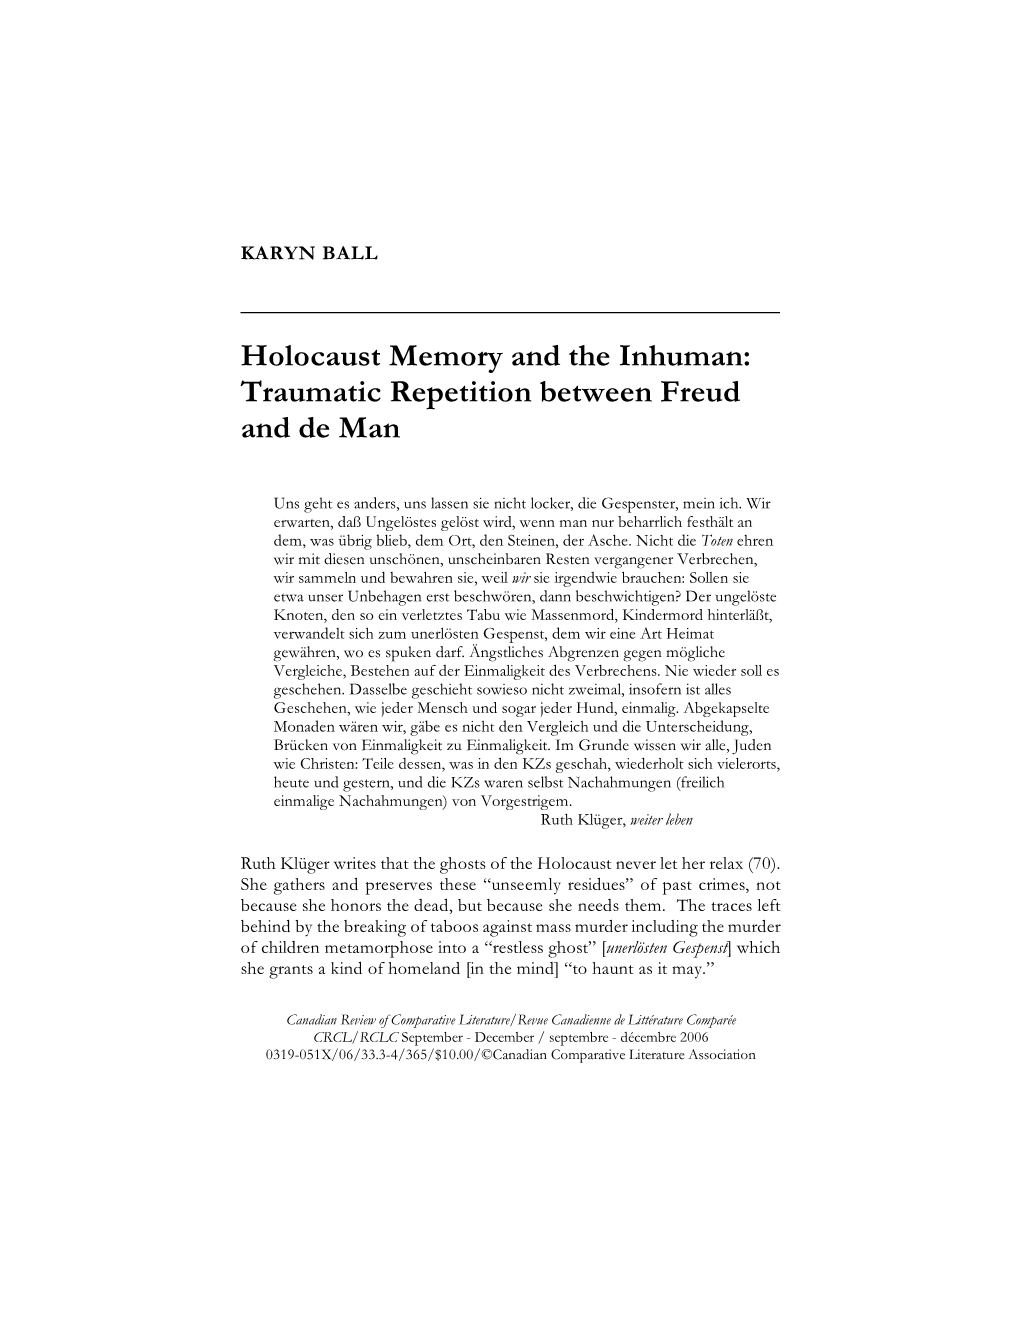 Holocaust Memory and the Inhuman: Traumatic Repetition Between Freud and De Man